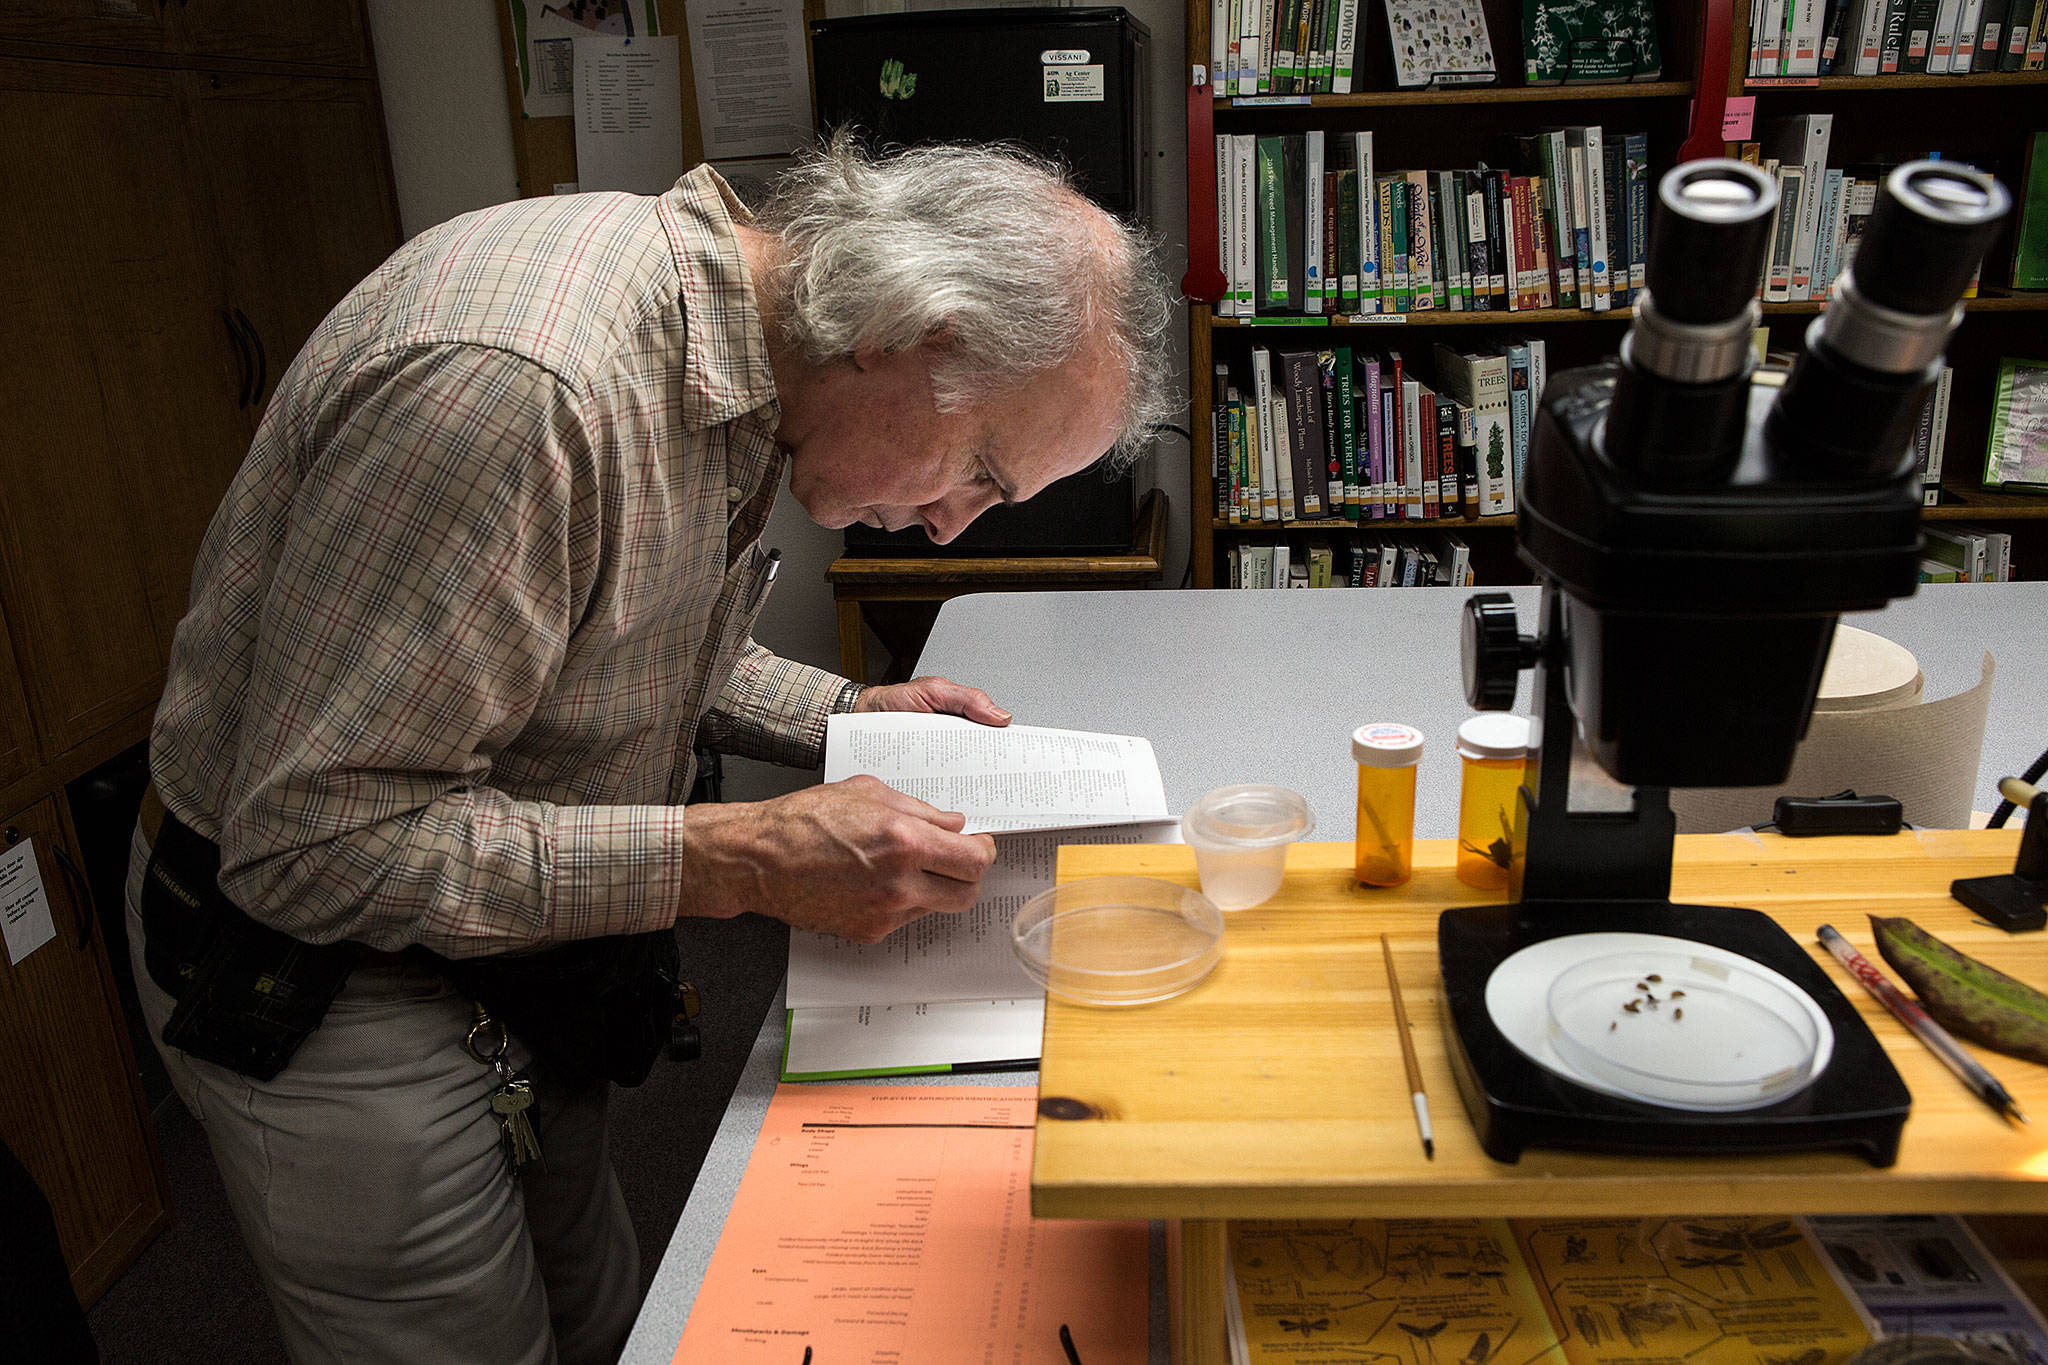 Dave Pehling looks though a book to identify a fly, seen under the microscope, at the WSU Extension Office in Everett’s McCollum Park. A zoologist, Pehling helps answer plant and pest questions for gardeners at the office’s drop-in clinic. (Andy Bronson / The Herald)